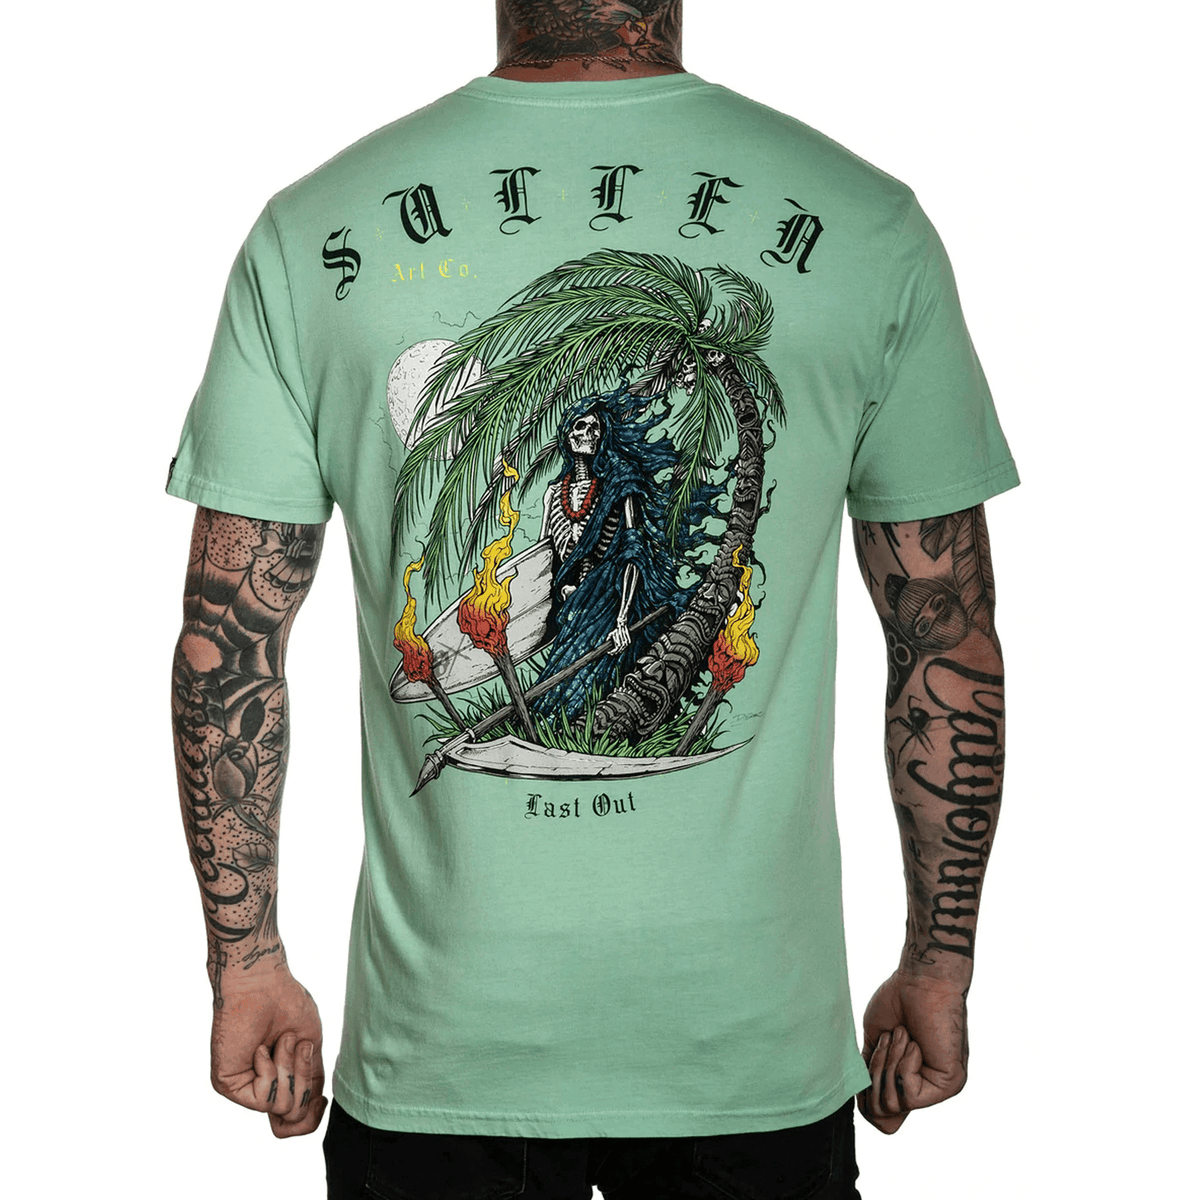 SULLEN-ART-COLLECTIVE-LAST-OUT-SS-TEE - T-SHIRT - Synik Clothing - synikclothing.com